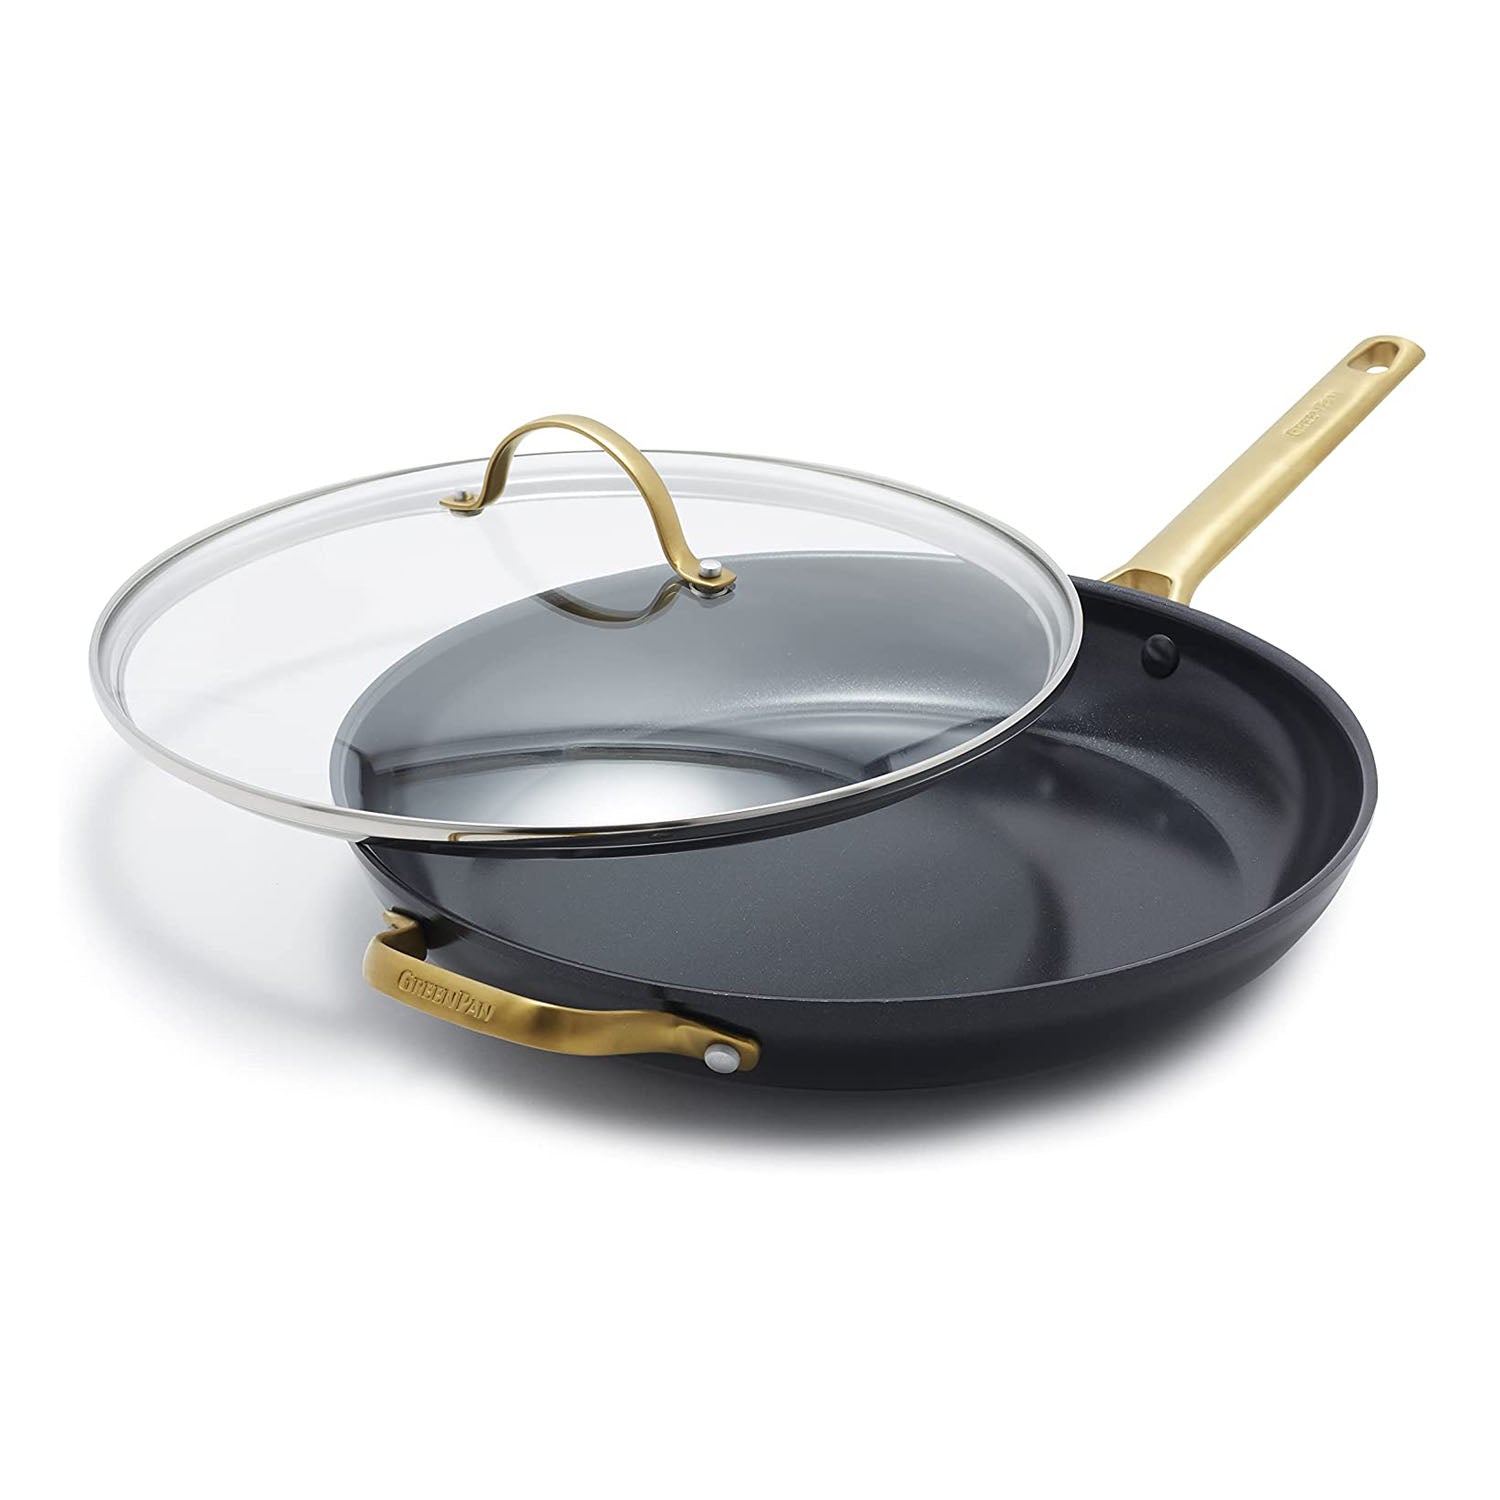 Reserve Ceramic Nonstick 12 Frypan with Lid and Helper Handle, Black